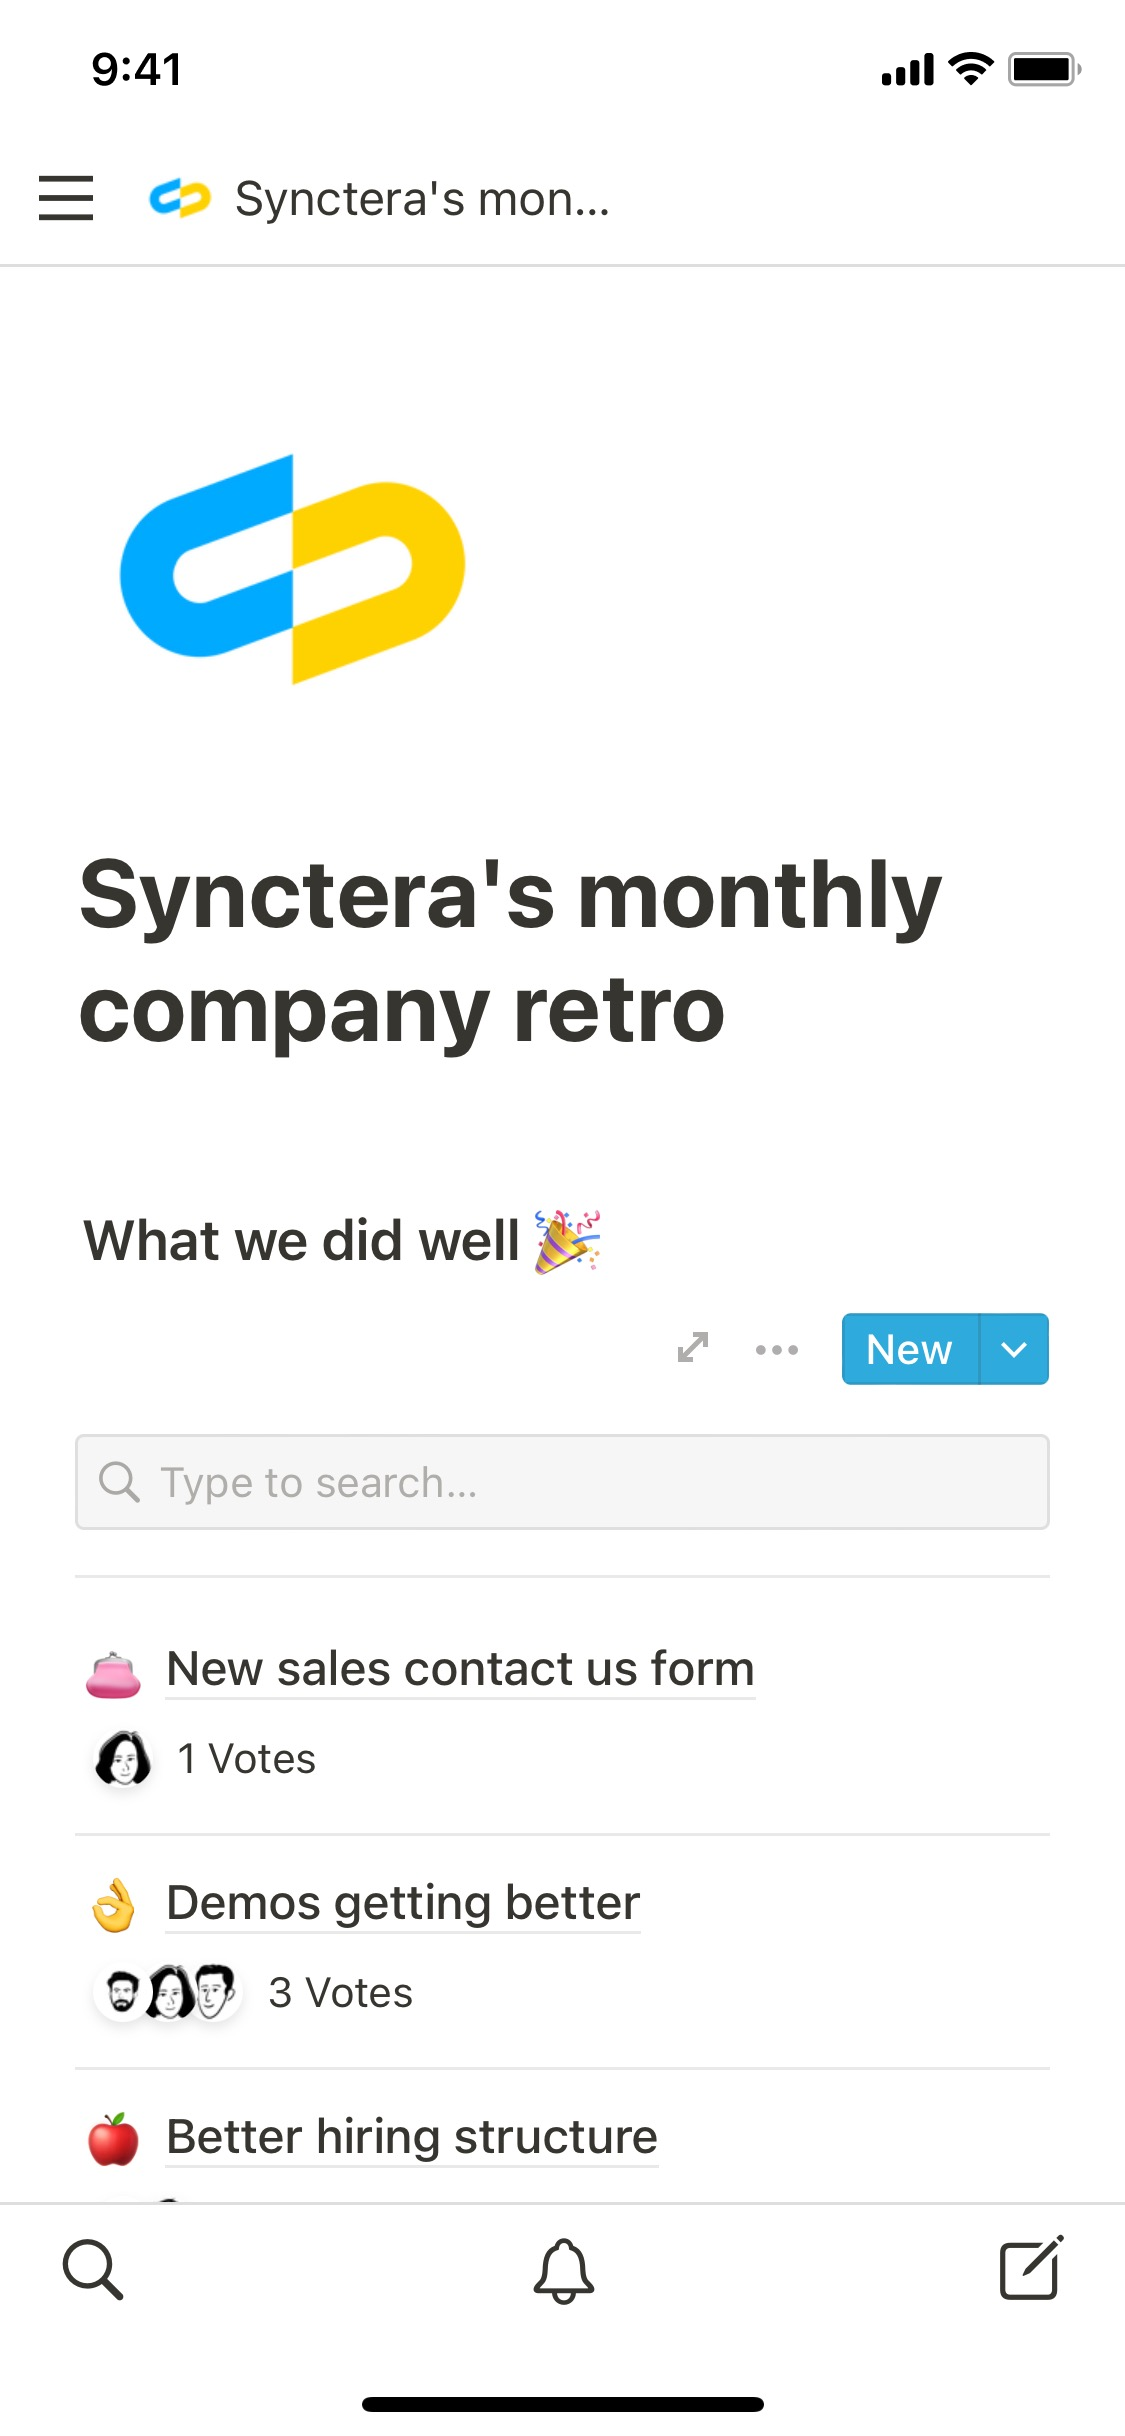 The mobile image for Synctera's monthly company retro template